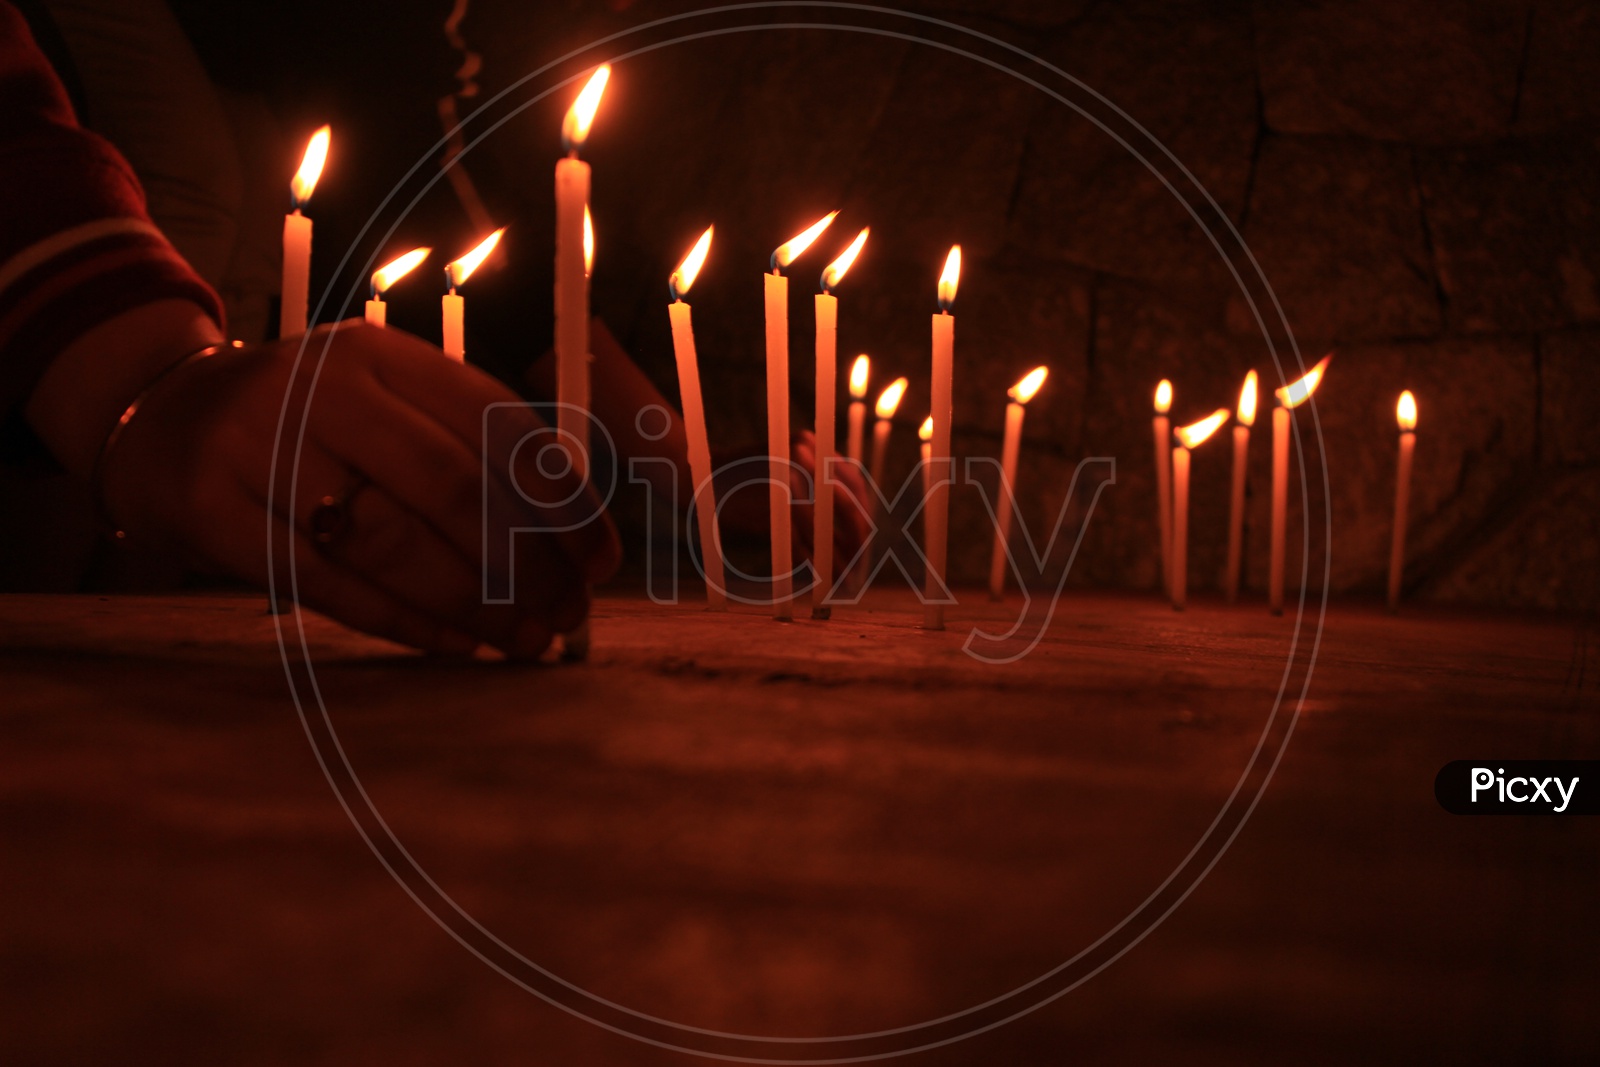 Candles lit in a Church